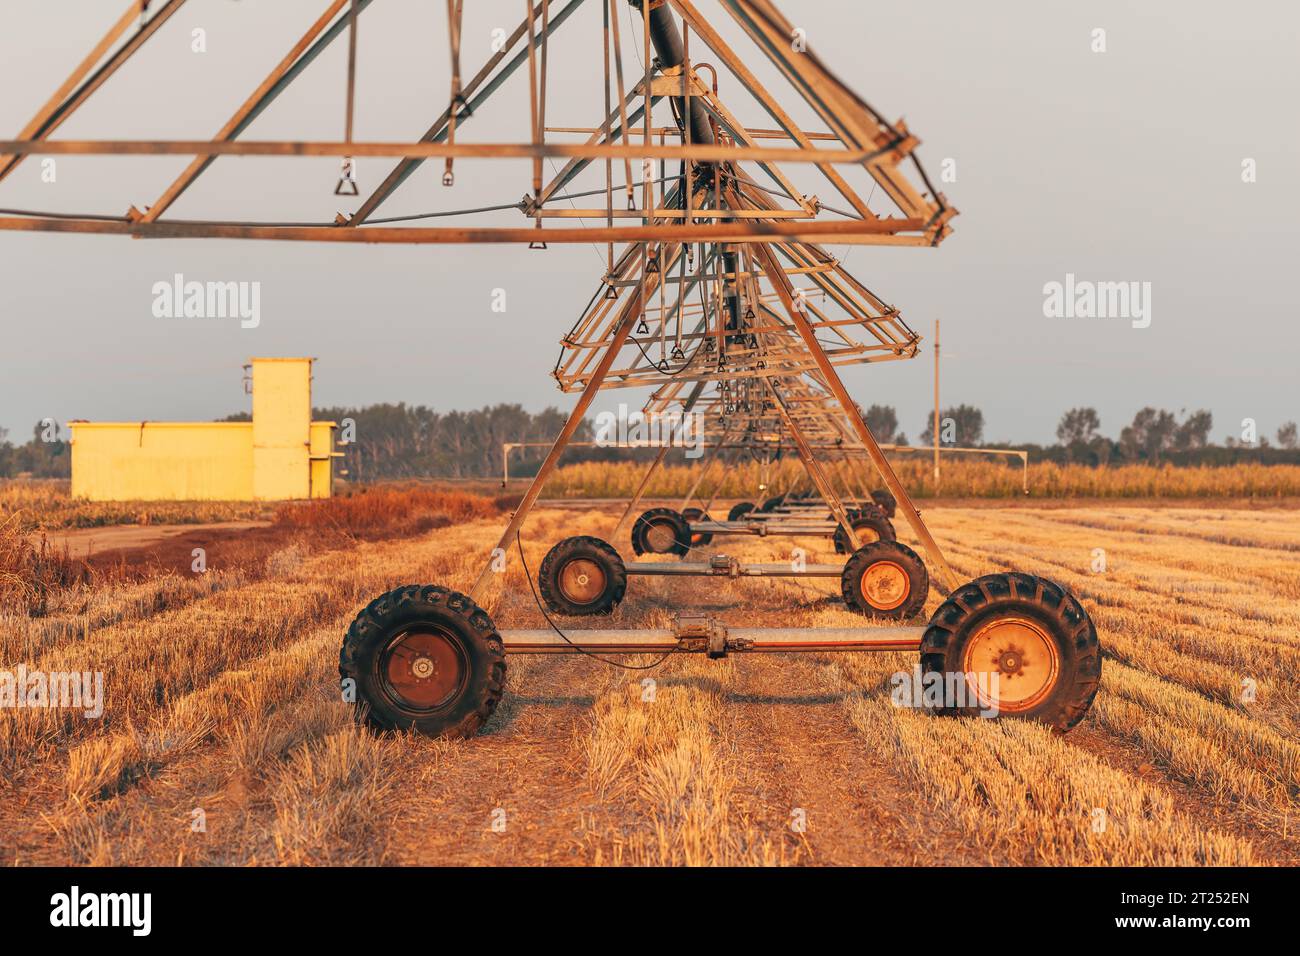 Automated farming irrigation sprinklers on cultivated field, selective focus Stock Photo